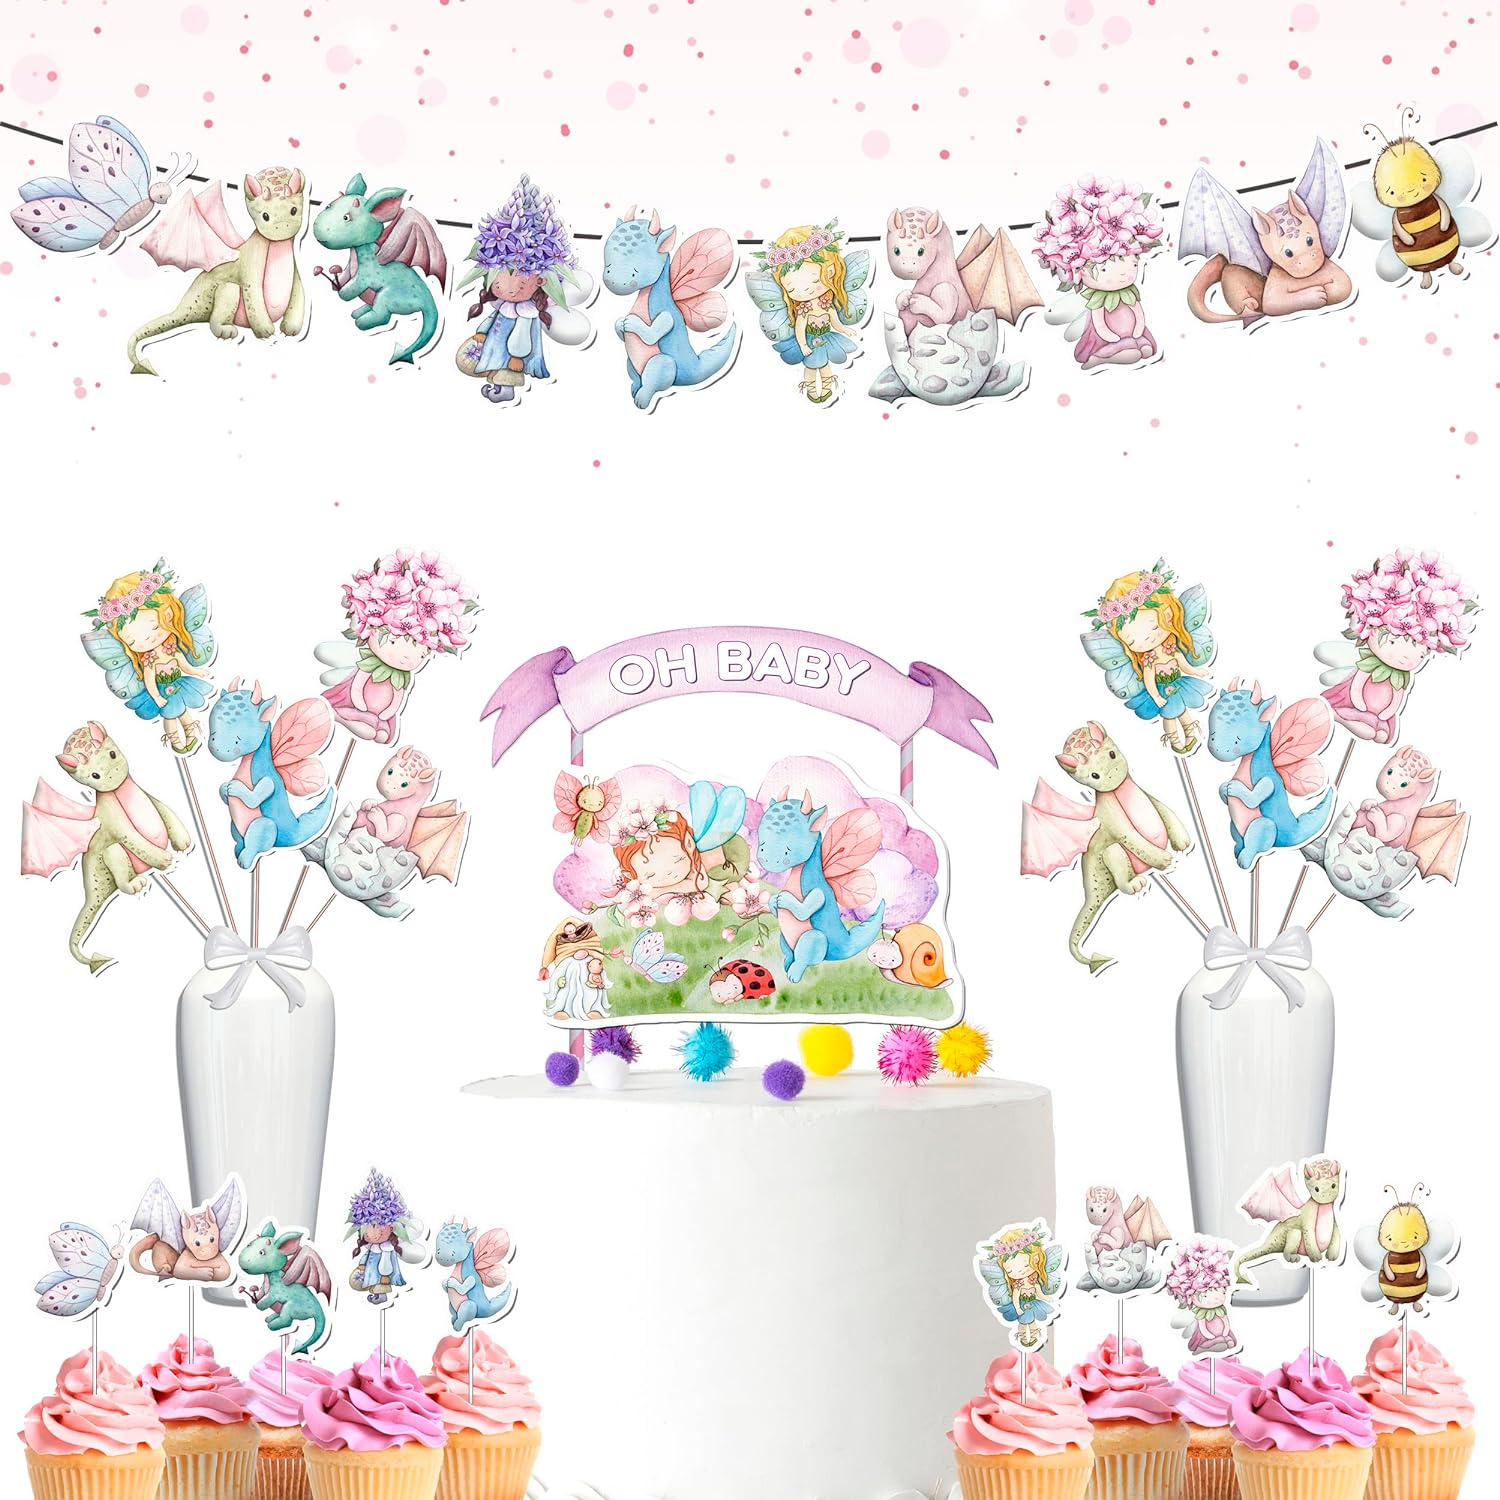 "Enchanted Realm" - Fairy and Dragon Party Decor Set